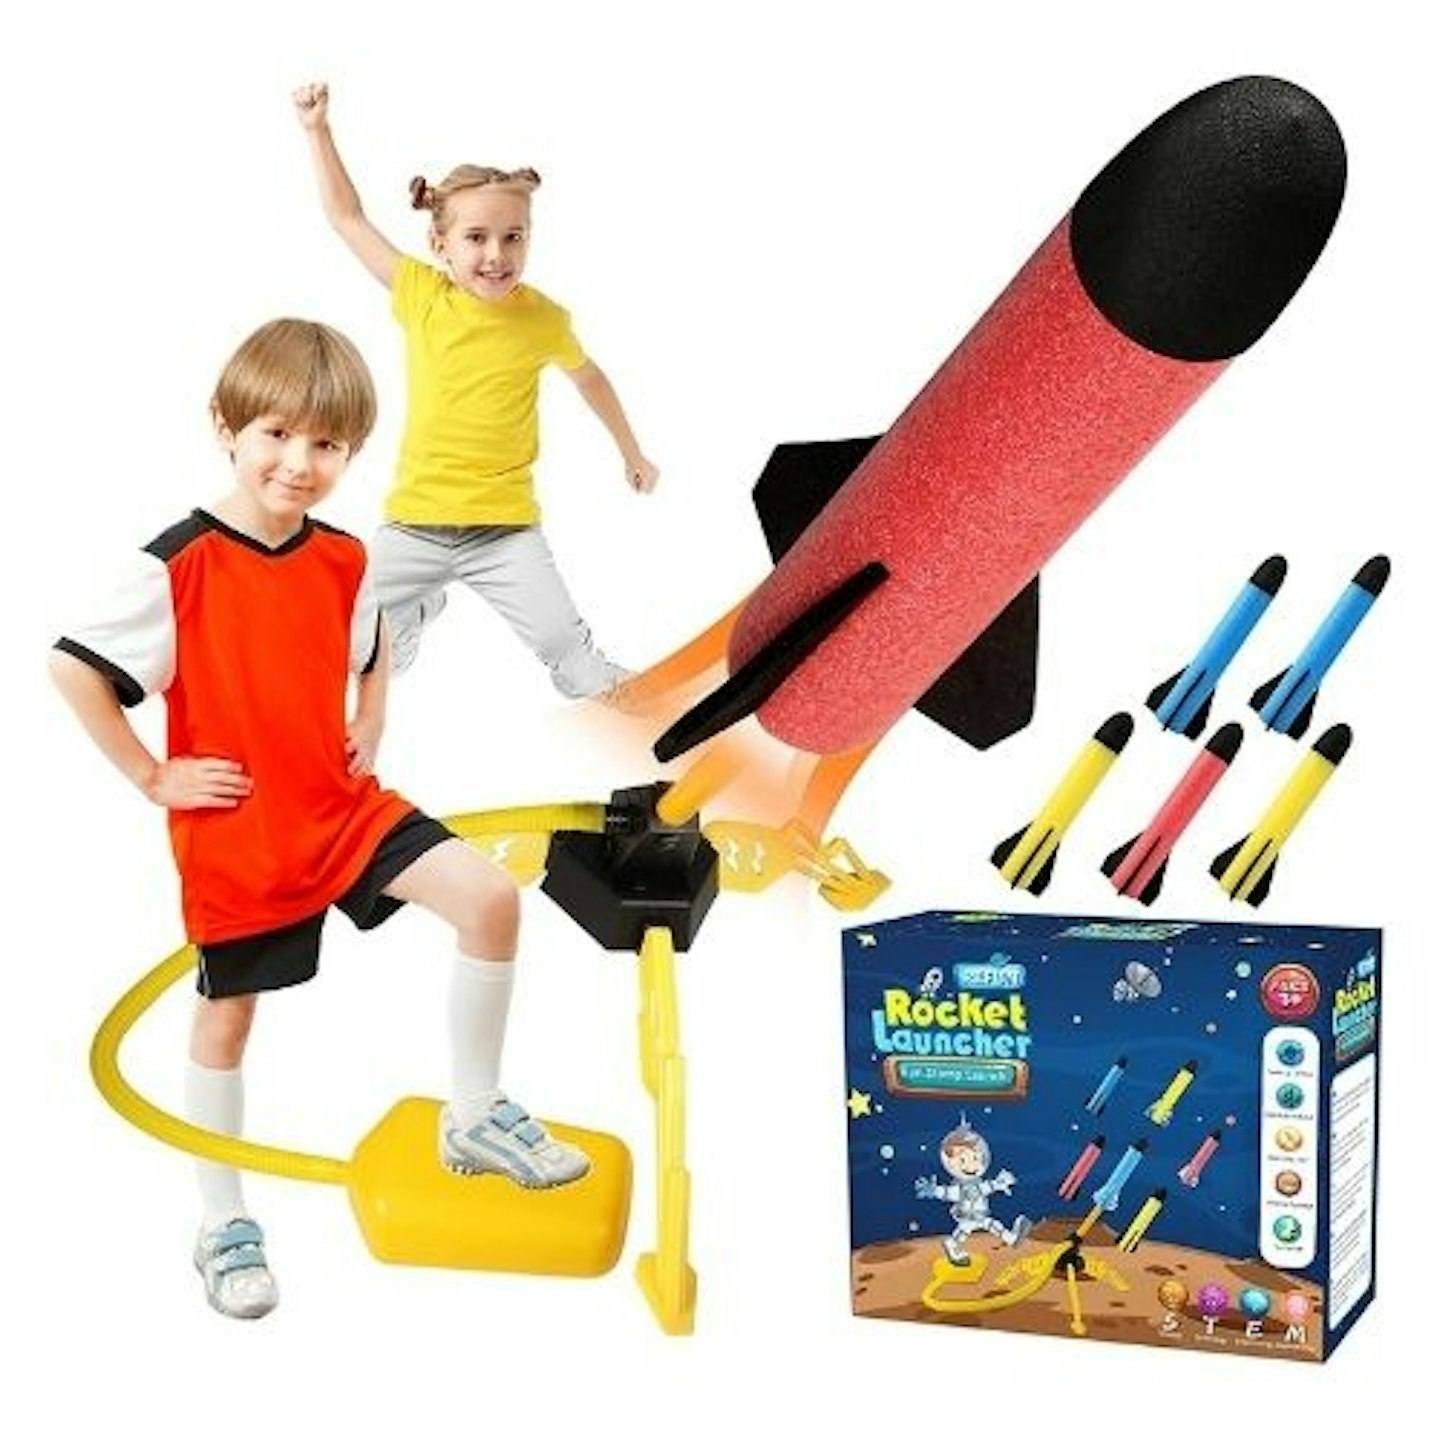 best toy rockets REFUN Toy Rocket Launcher for Kids with 6 Foam Rockets and Toy Air Rocket Launcher, STEM Gift for Boys and Girls Ages 3 Years and Up, Christmas Xmas Easter Egg Gifts Fun Outdoor/ Indoor Toy for Kids